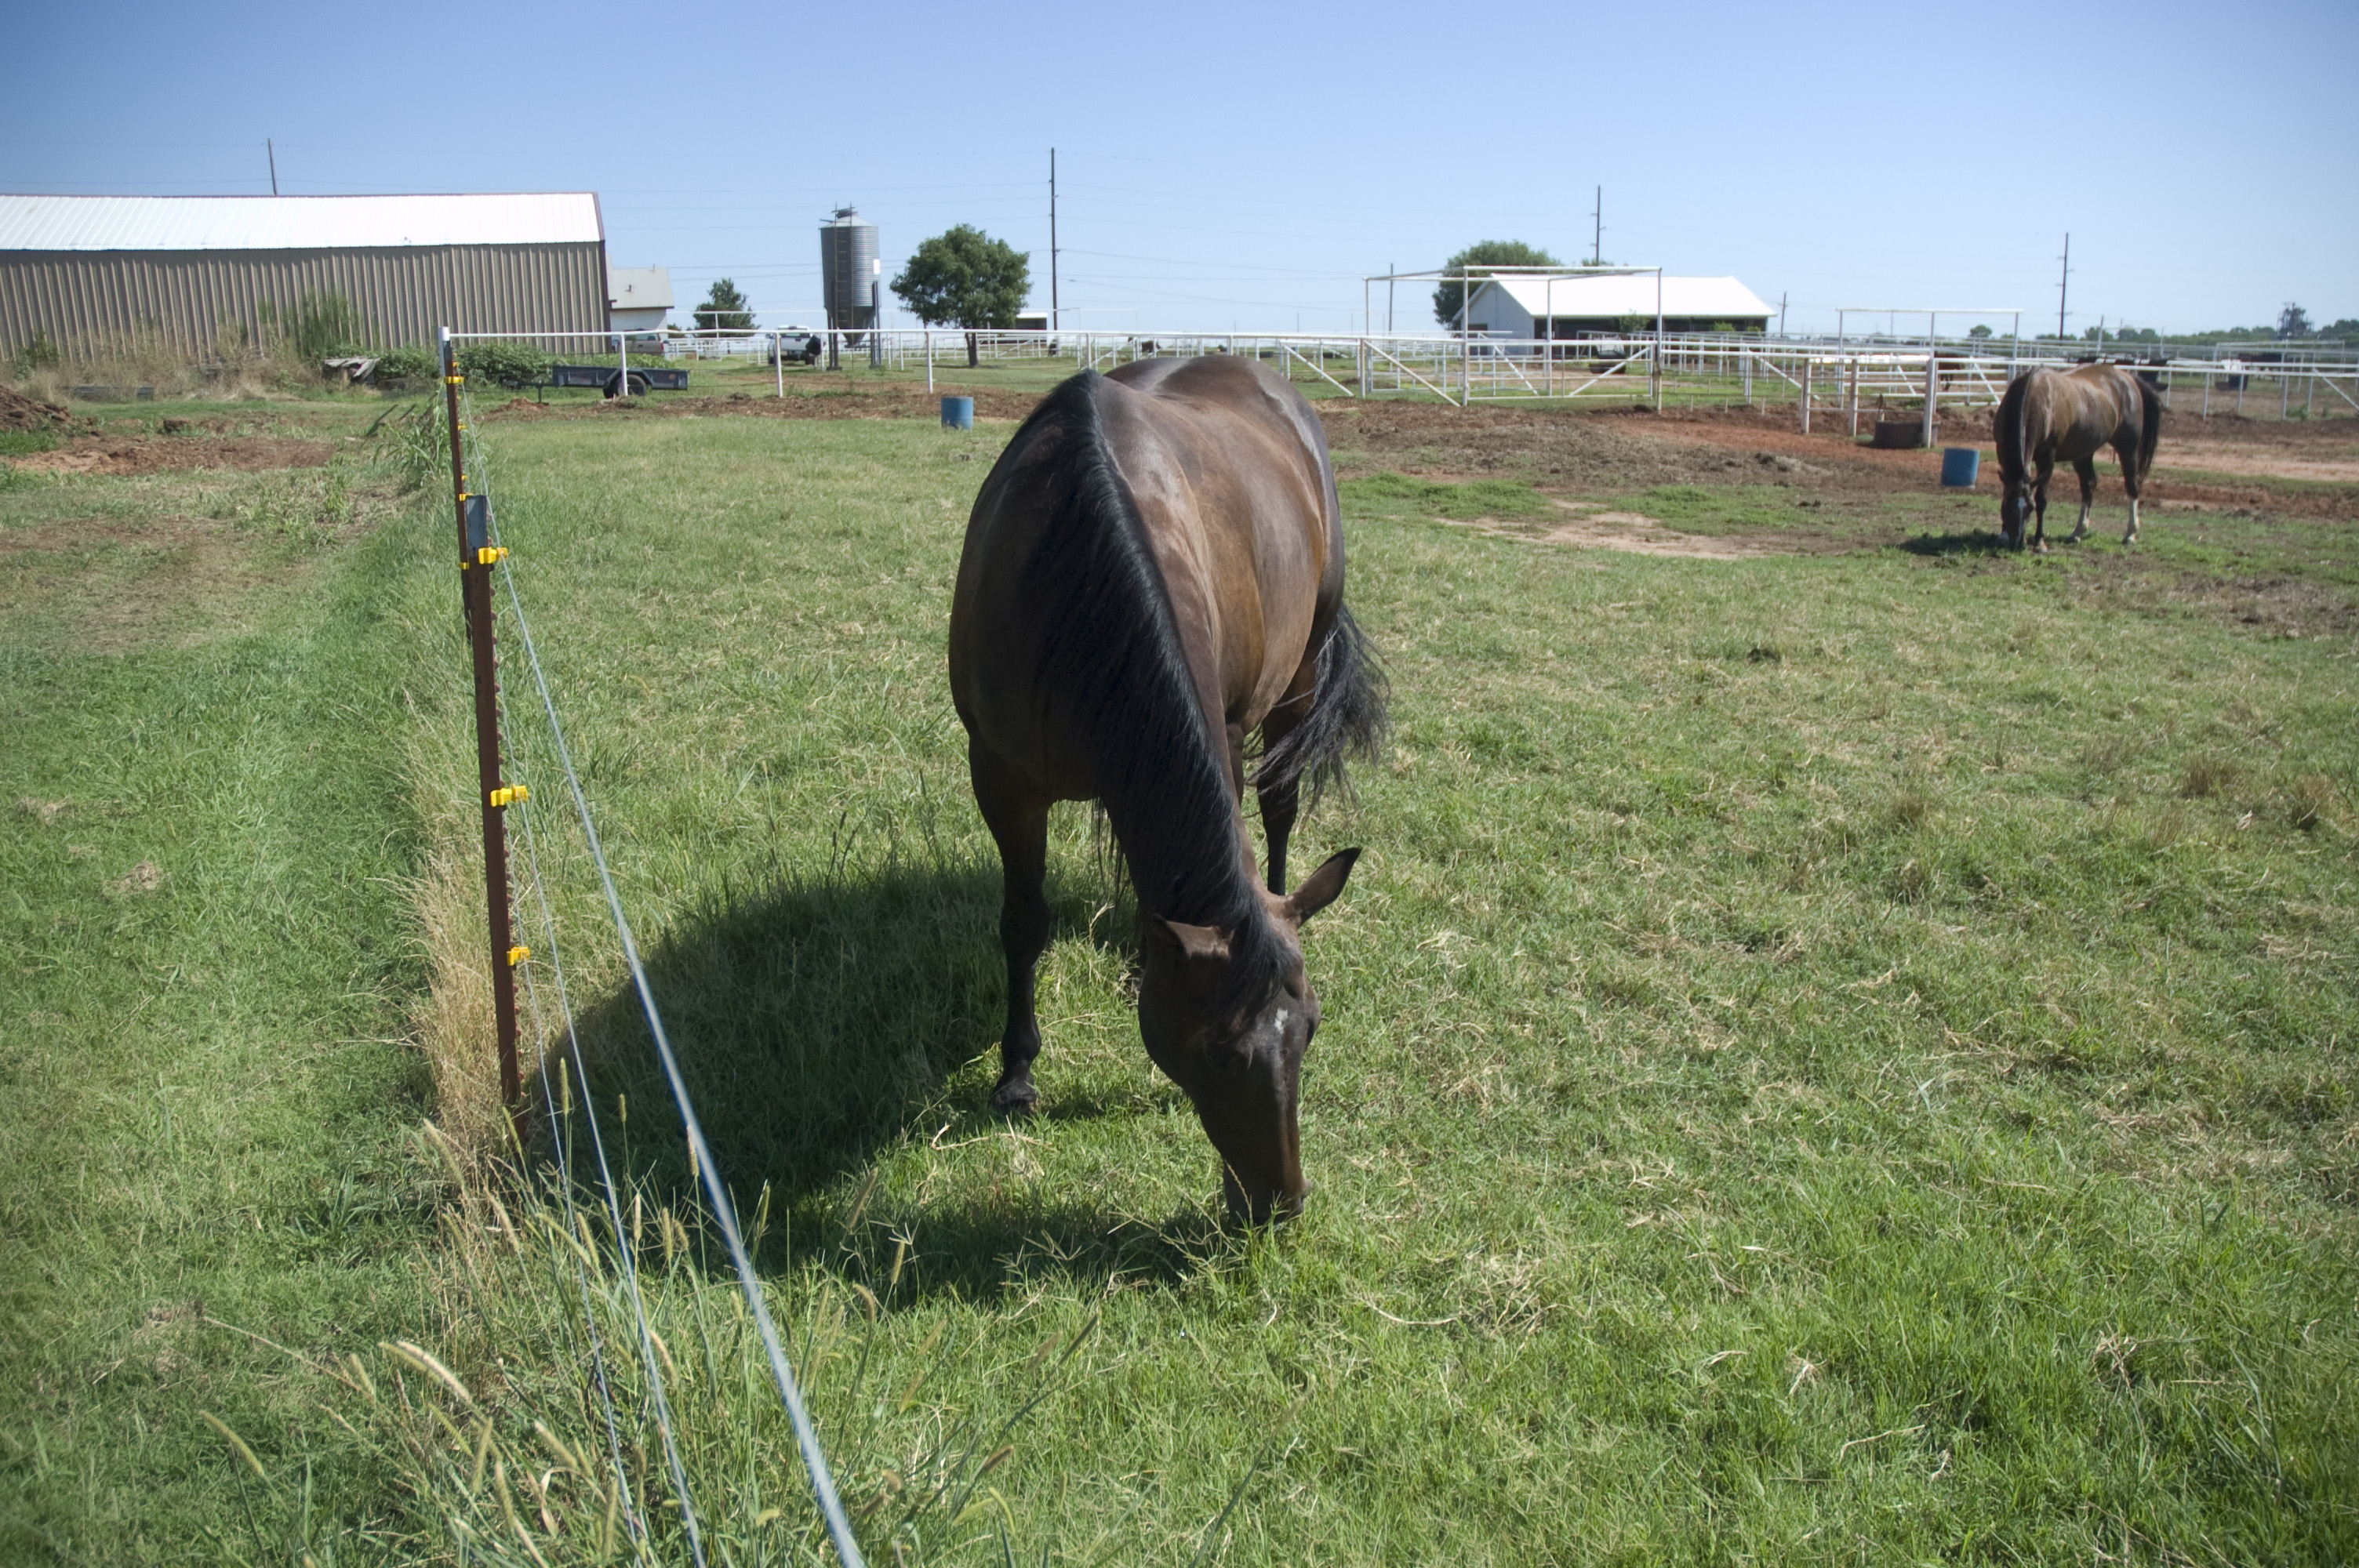 More Vesicular Stomatitis Cases Emerge In Texas